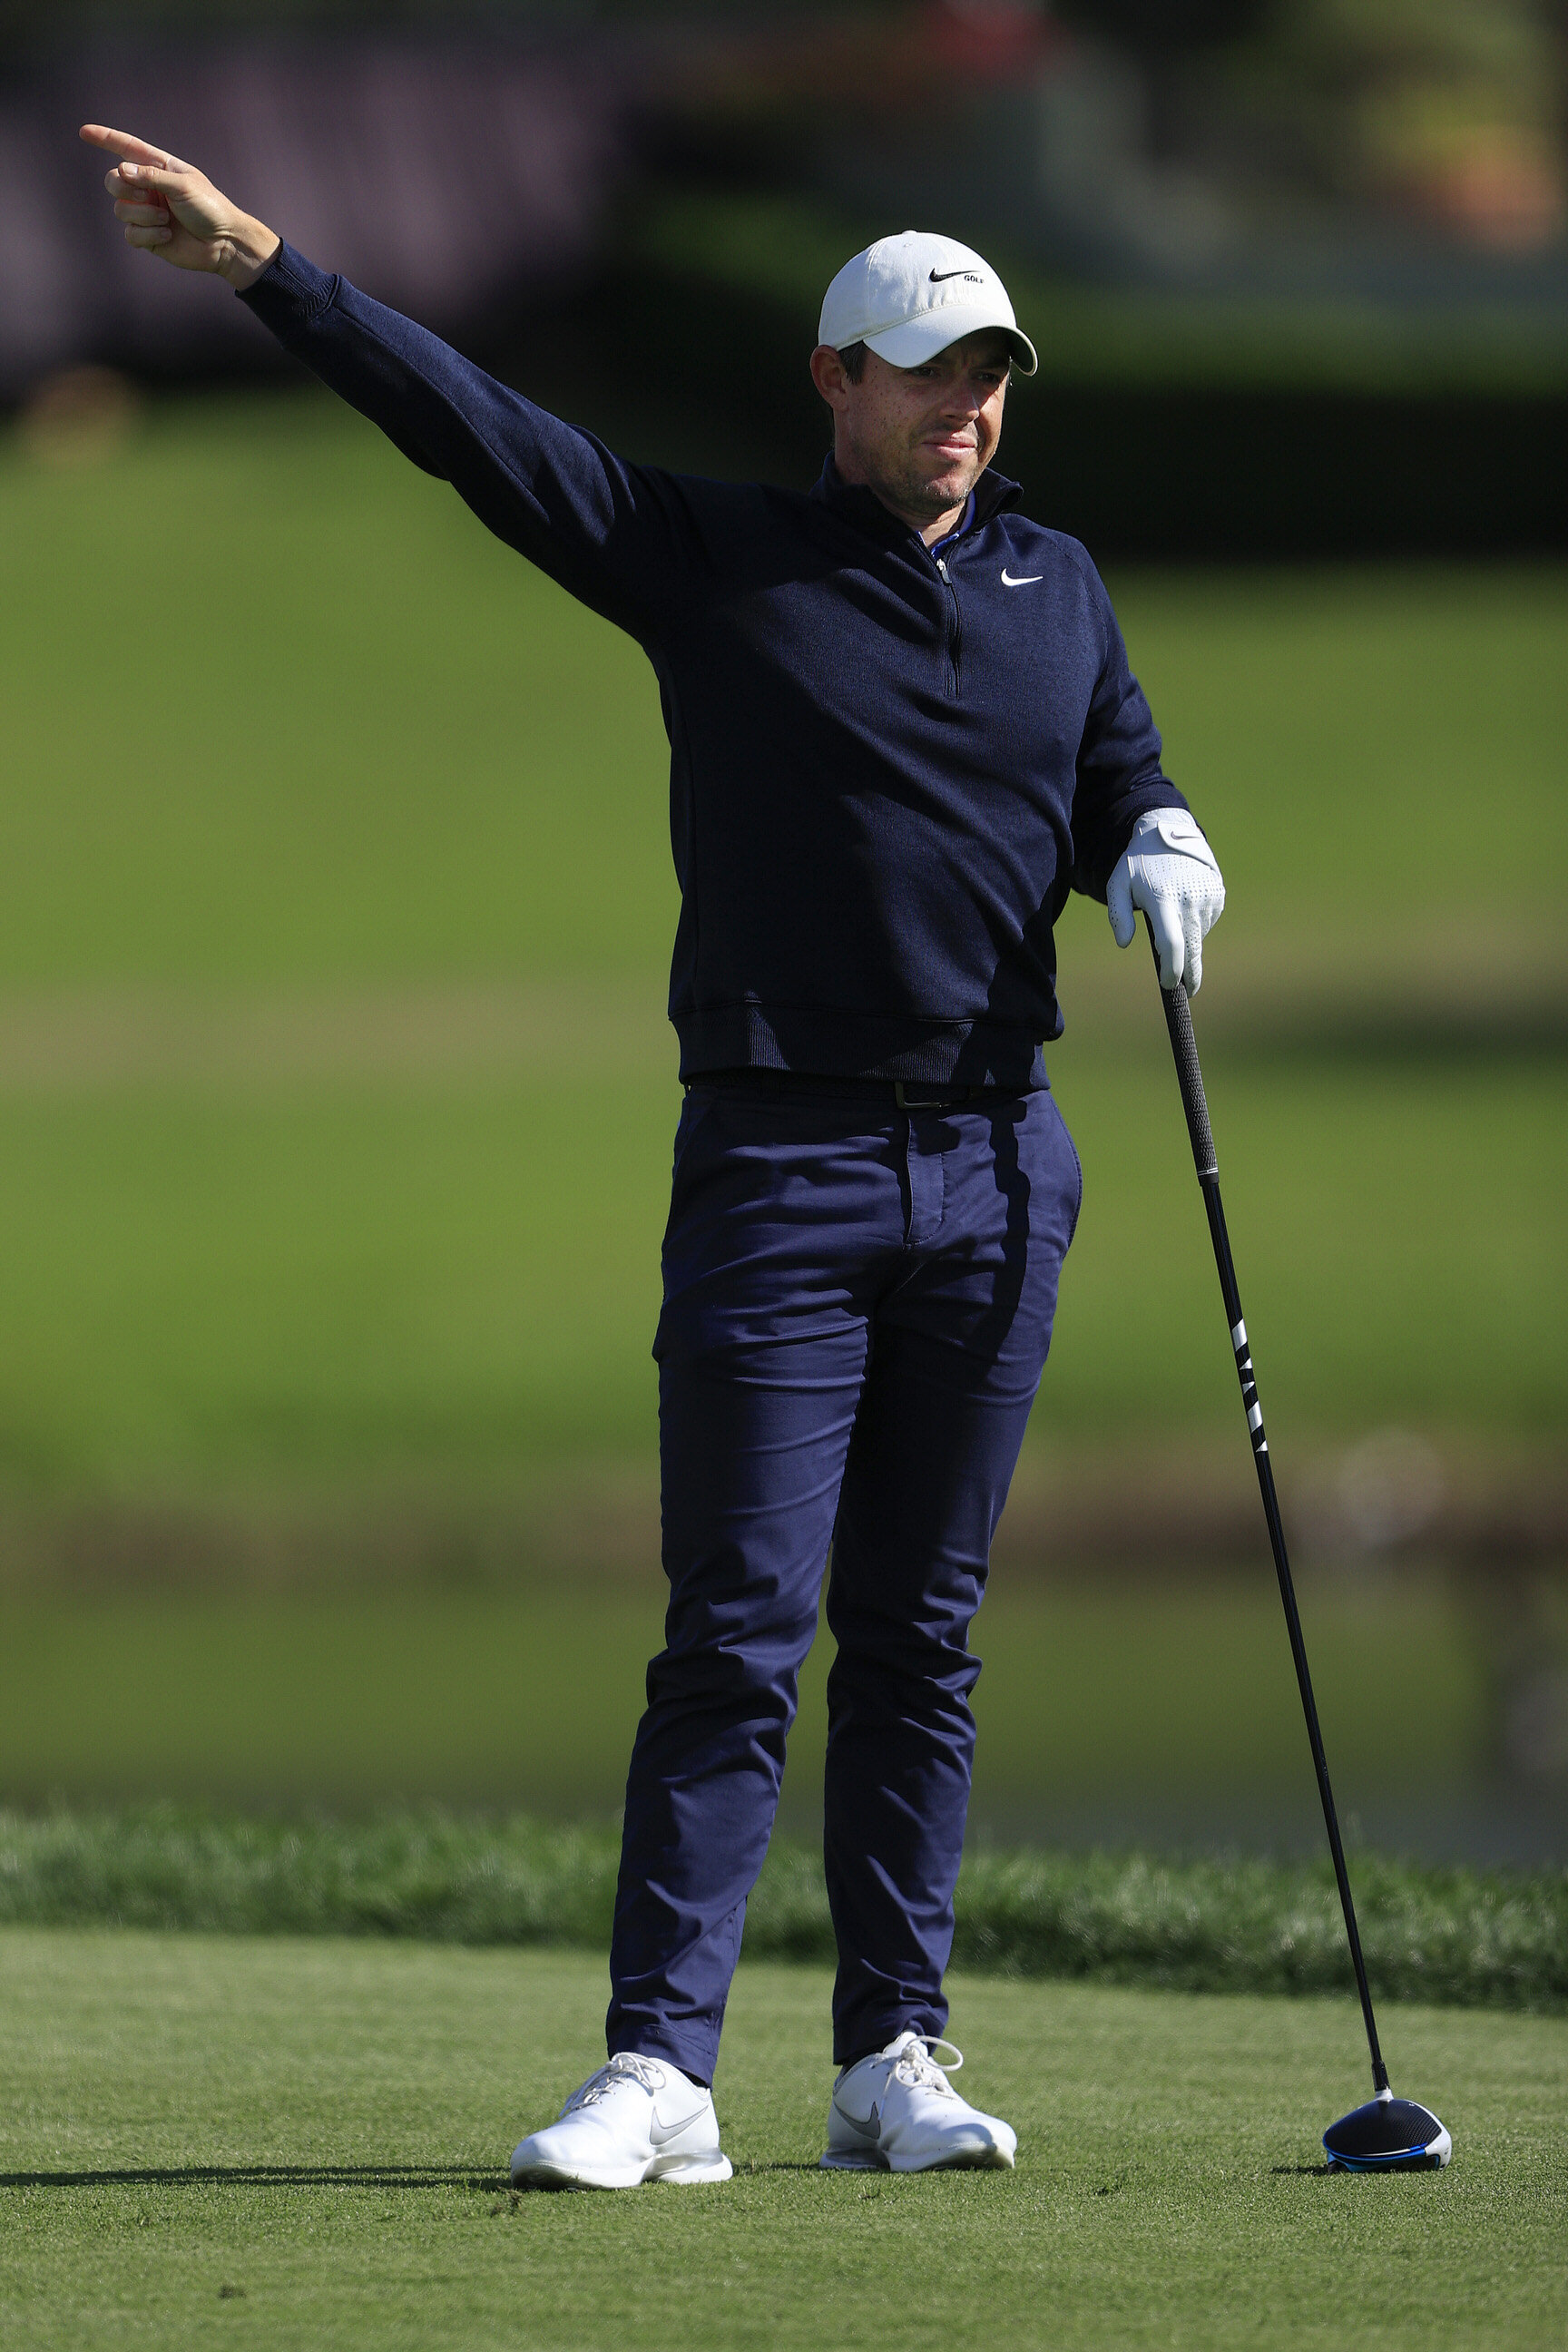  ORLANDO, FLORIDA - MARCH 04: Rory McIlroy of Northern Ireland reacts to his shot from the 16th tee during the first round of the Arnold Palmer Invitational Presented by MasterCard at the Bay Hill Club and Lodge on March 04, 2021 in Orlando, Florida.